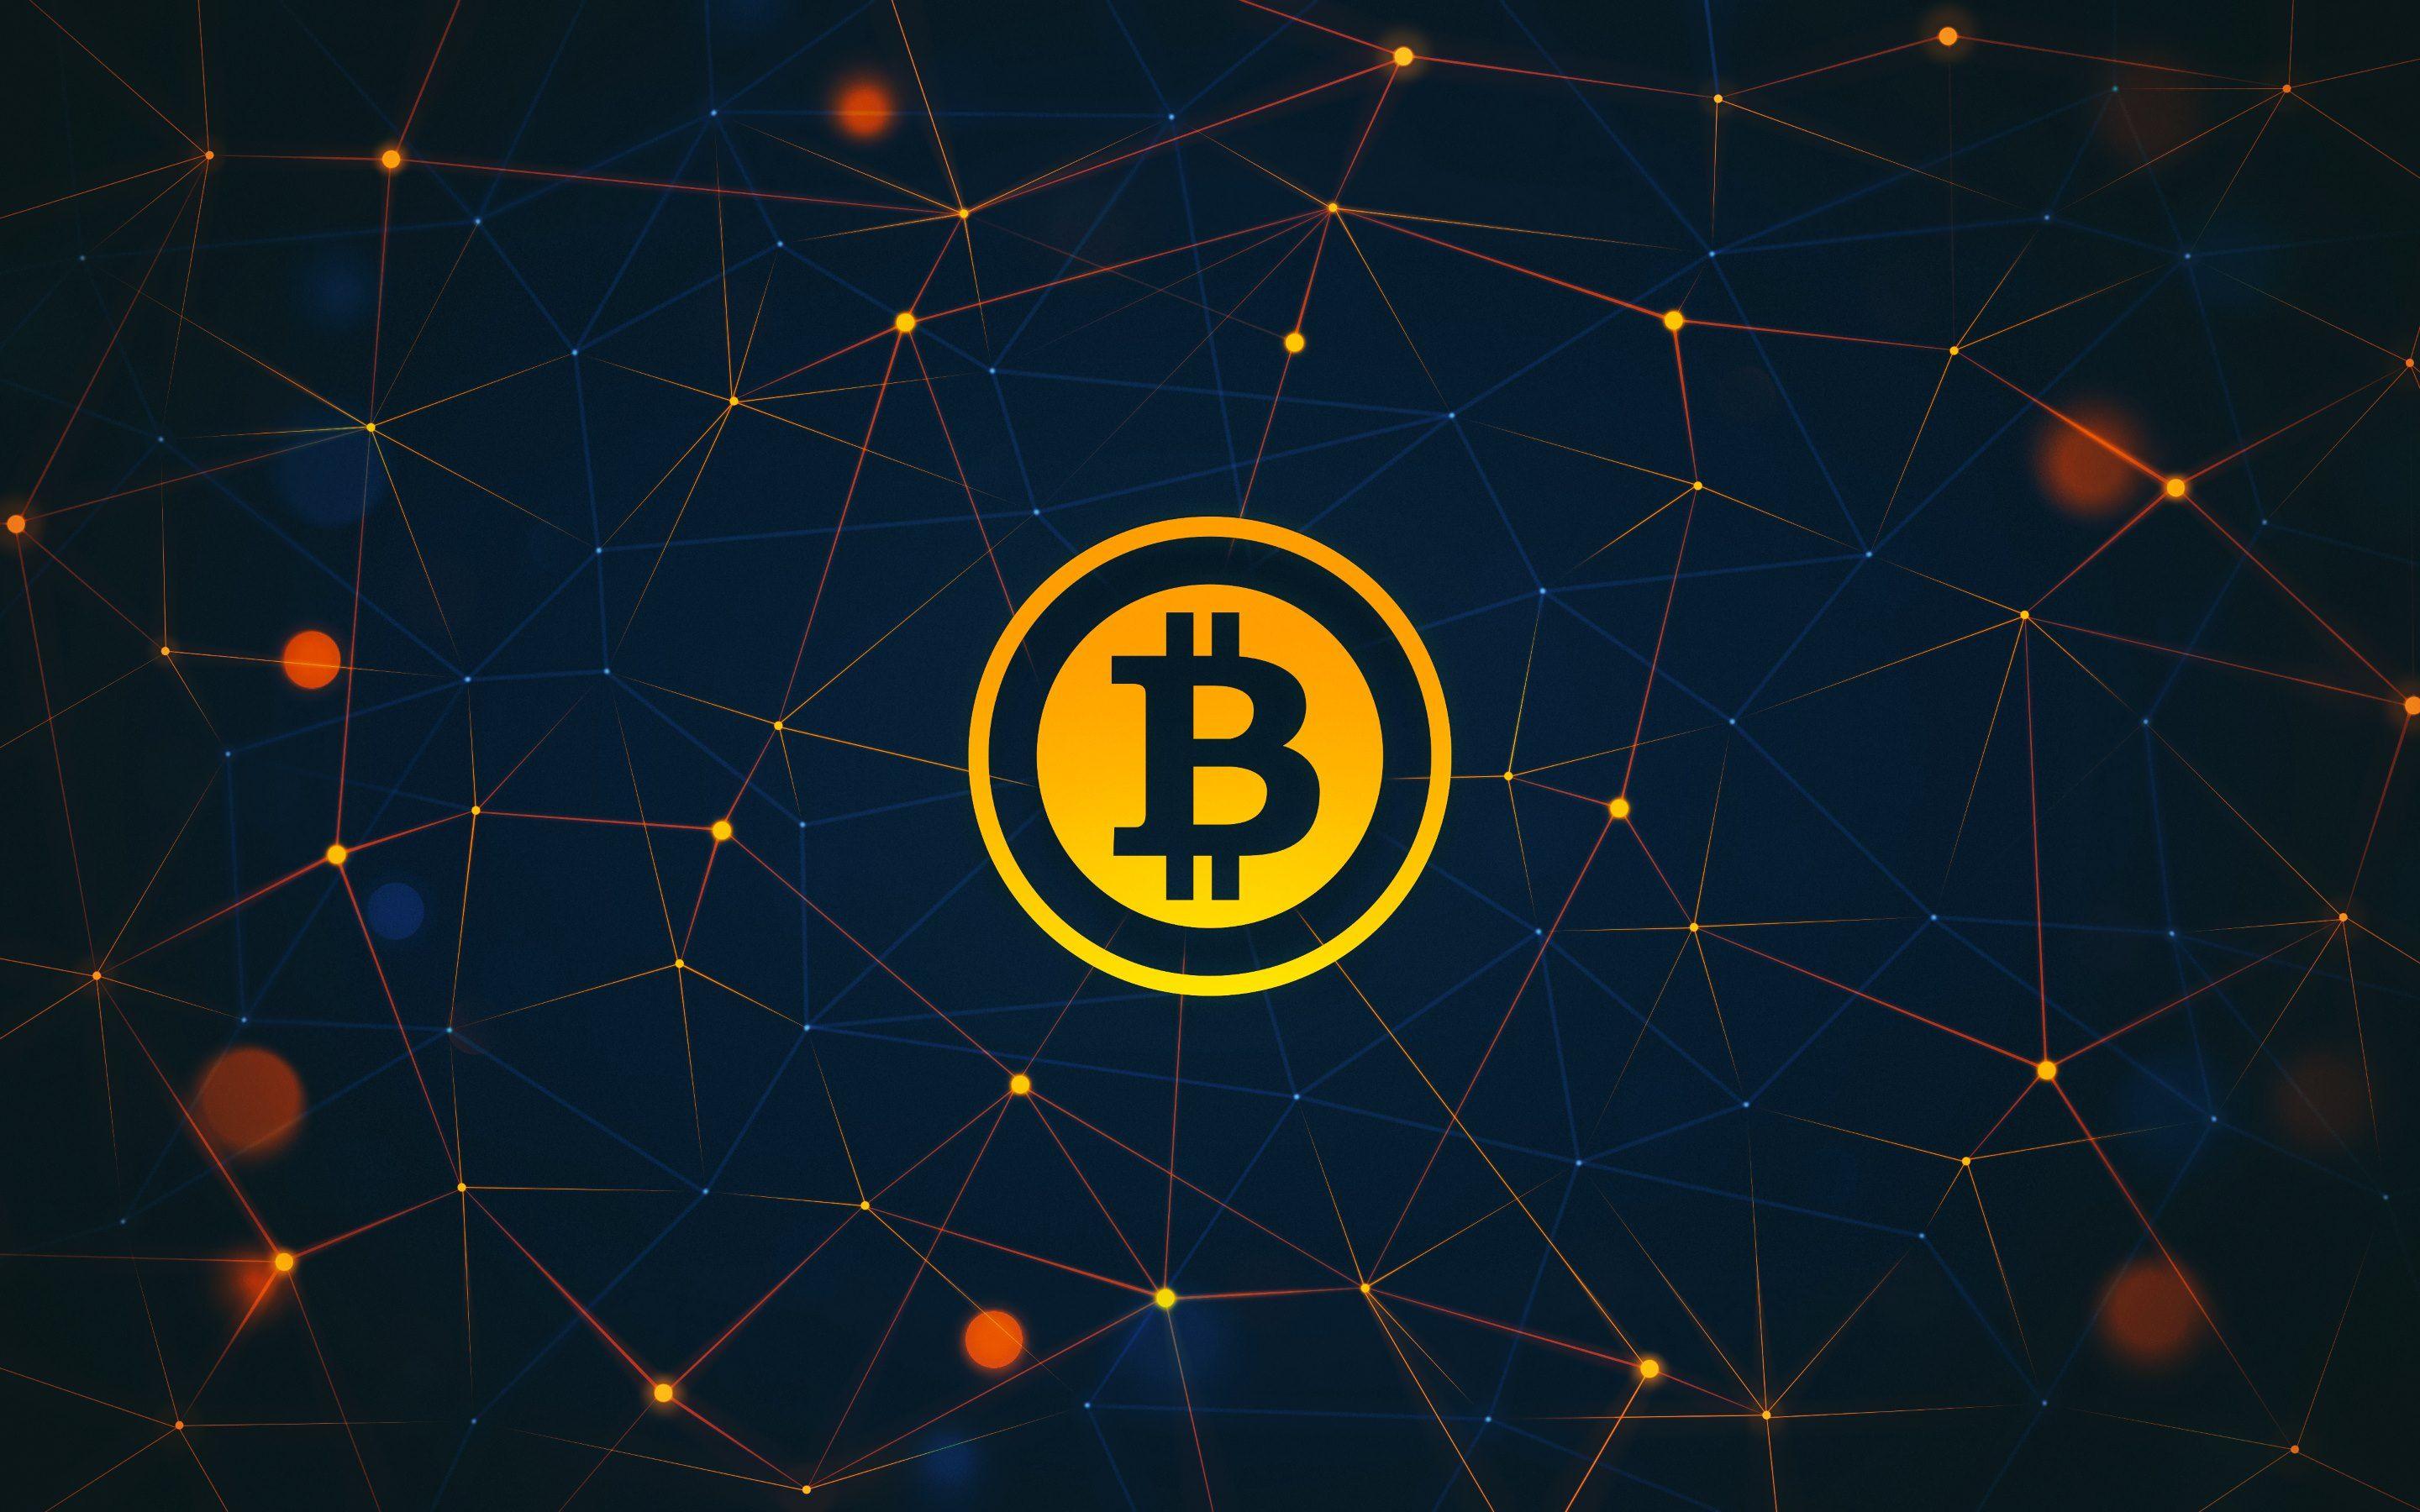 Bitcoin Wallpaper in HD, 4K and wide sizes